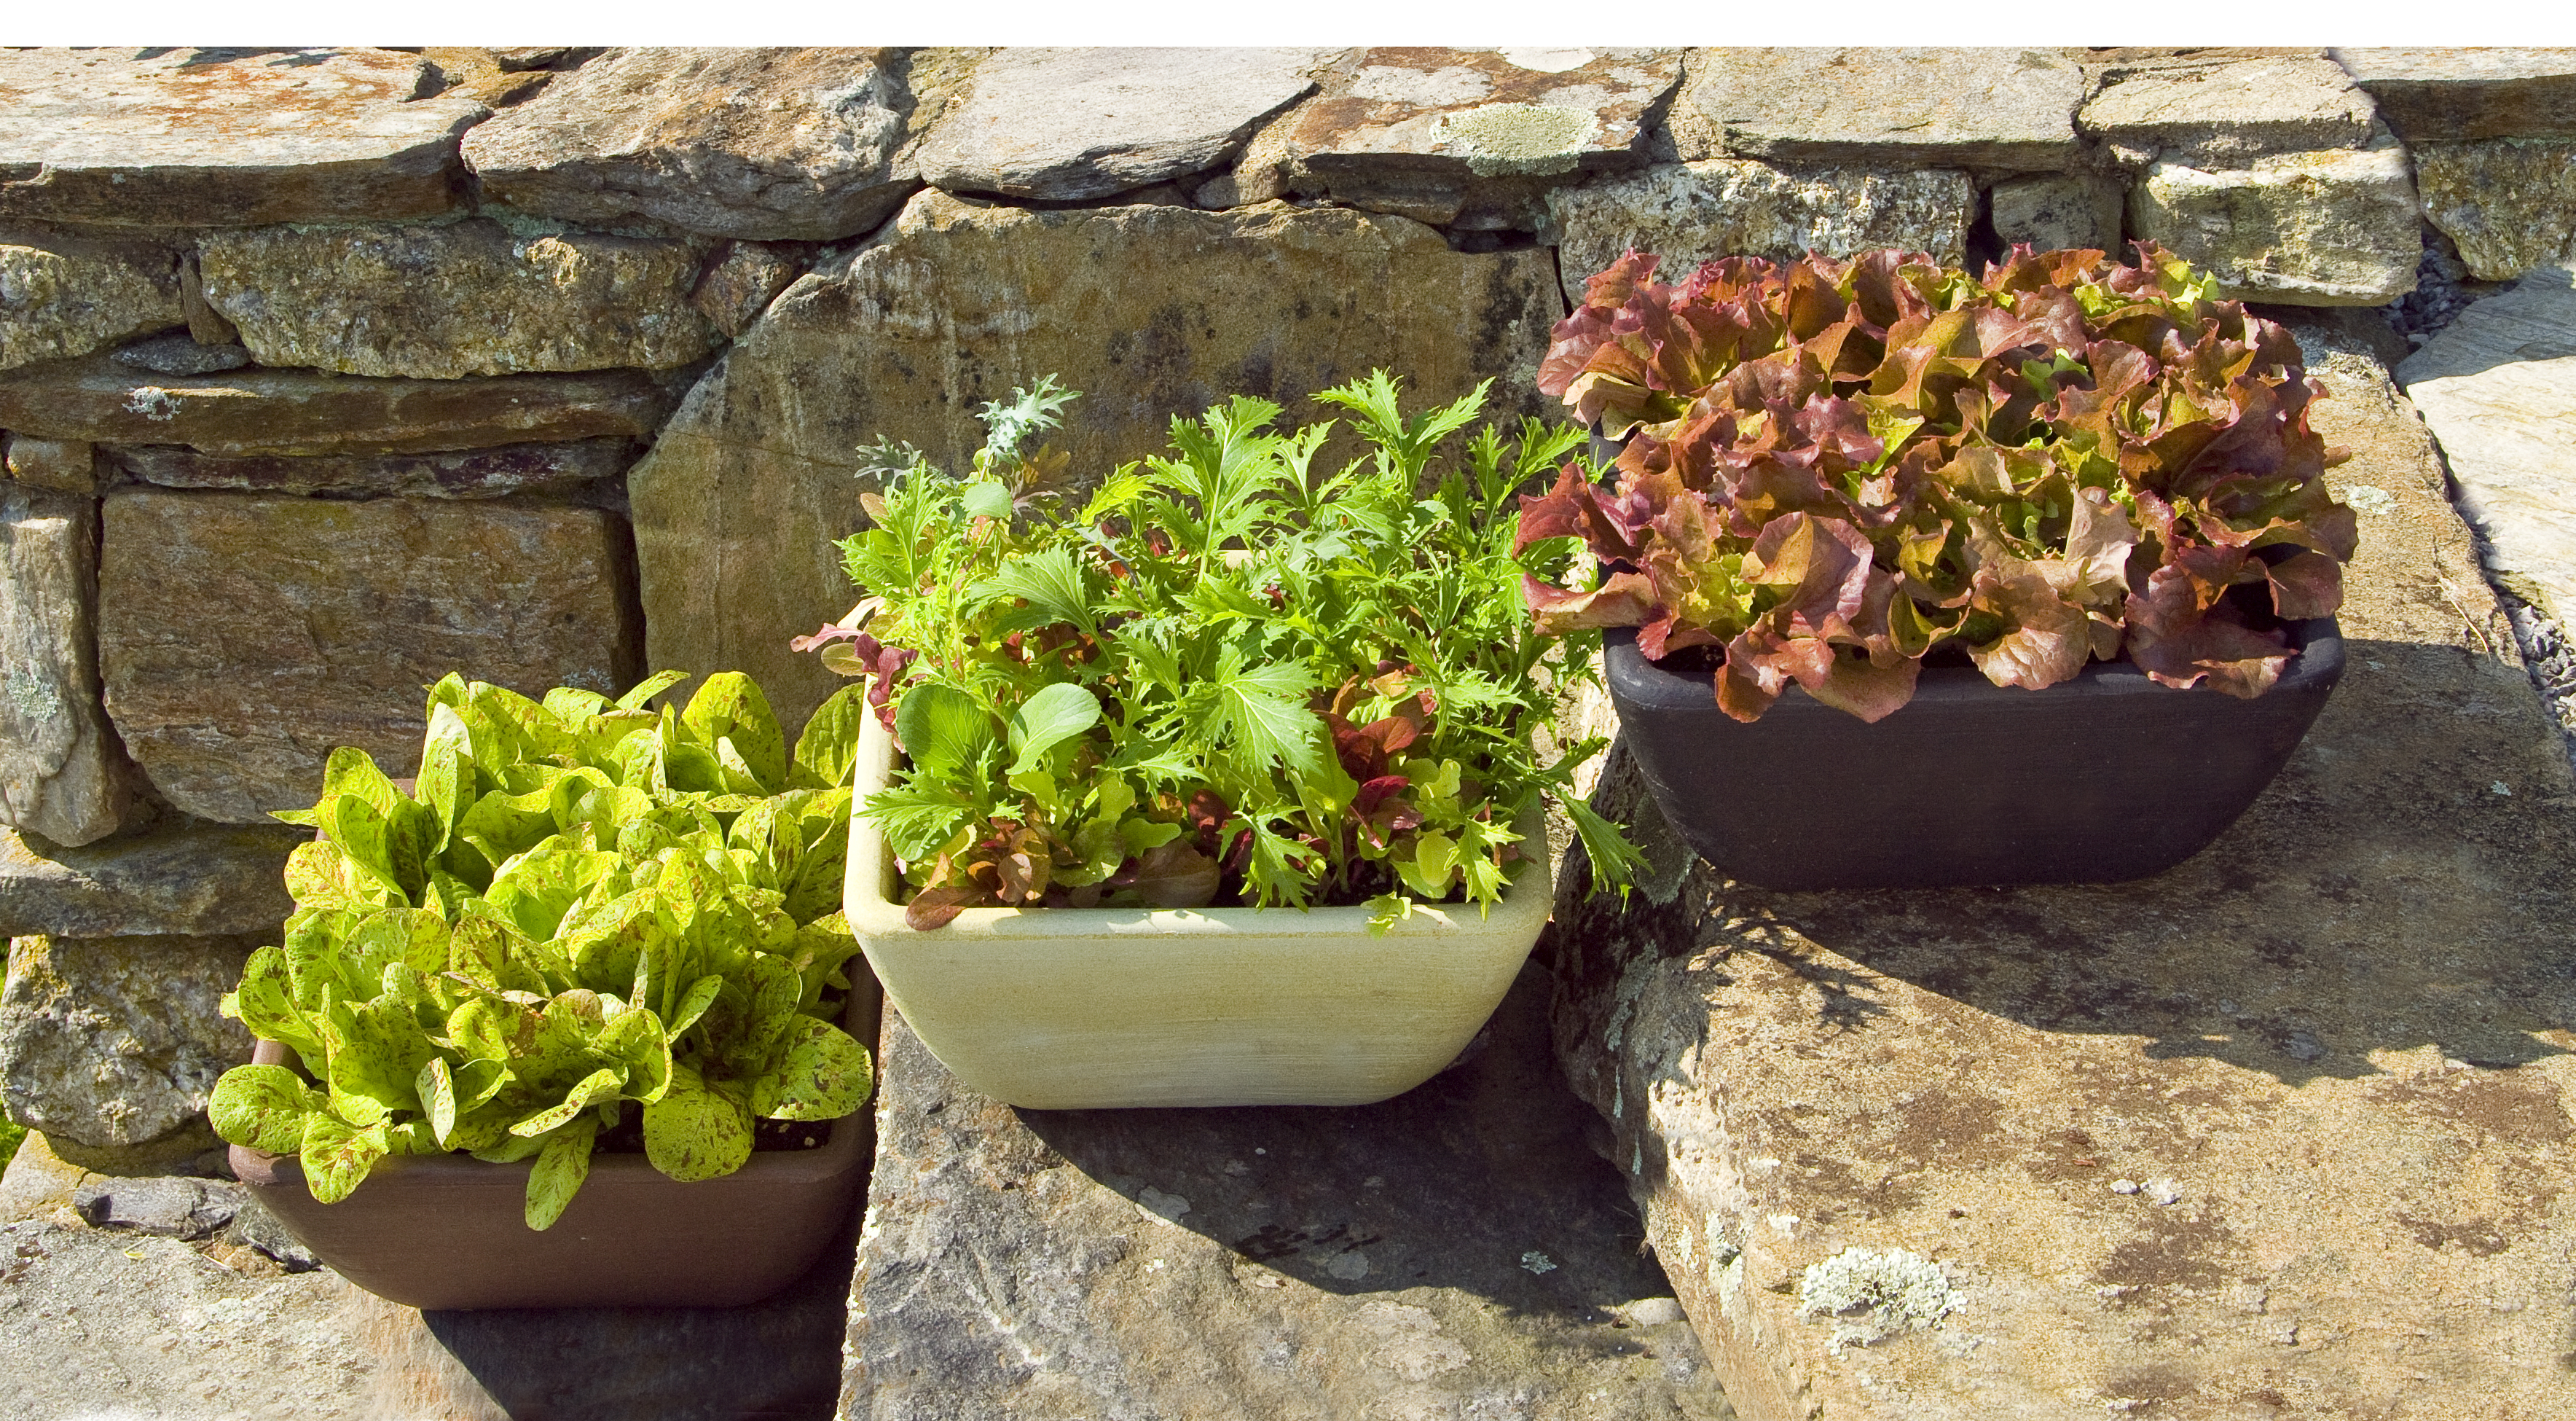 Six Great Containers for Growing Vegetables